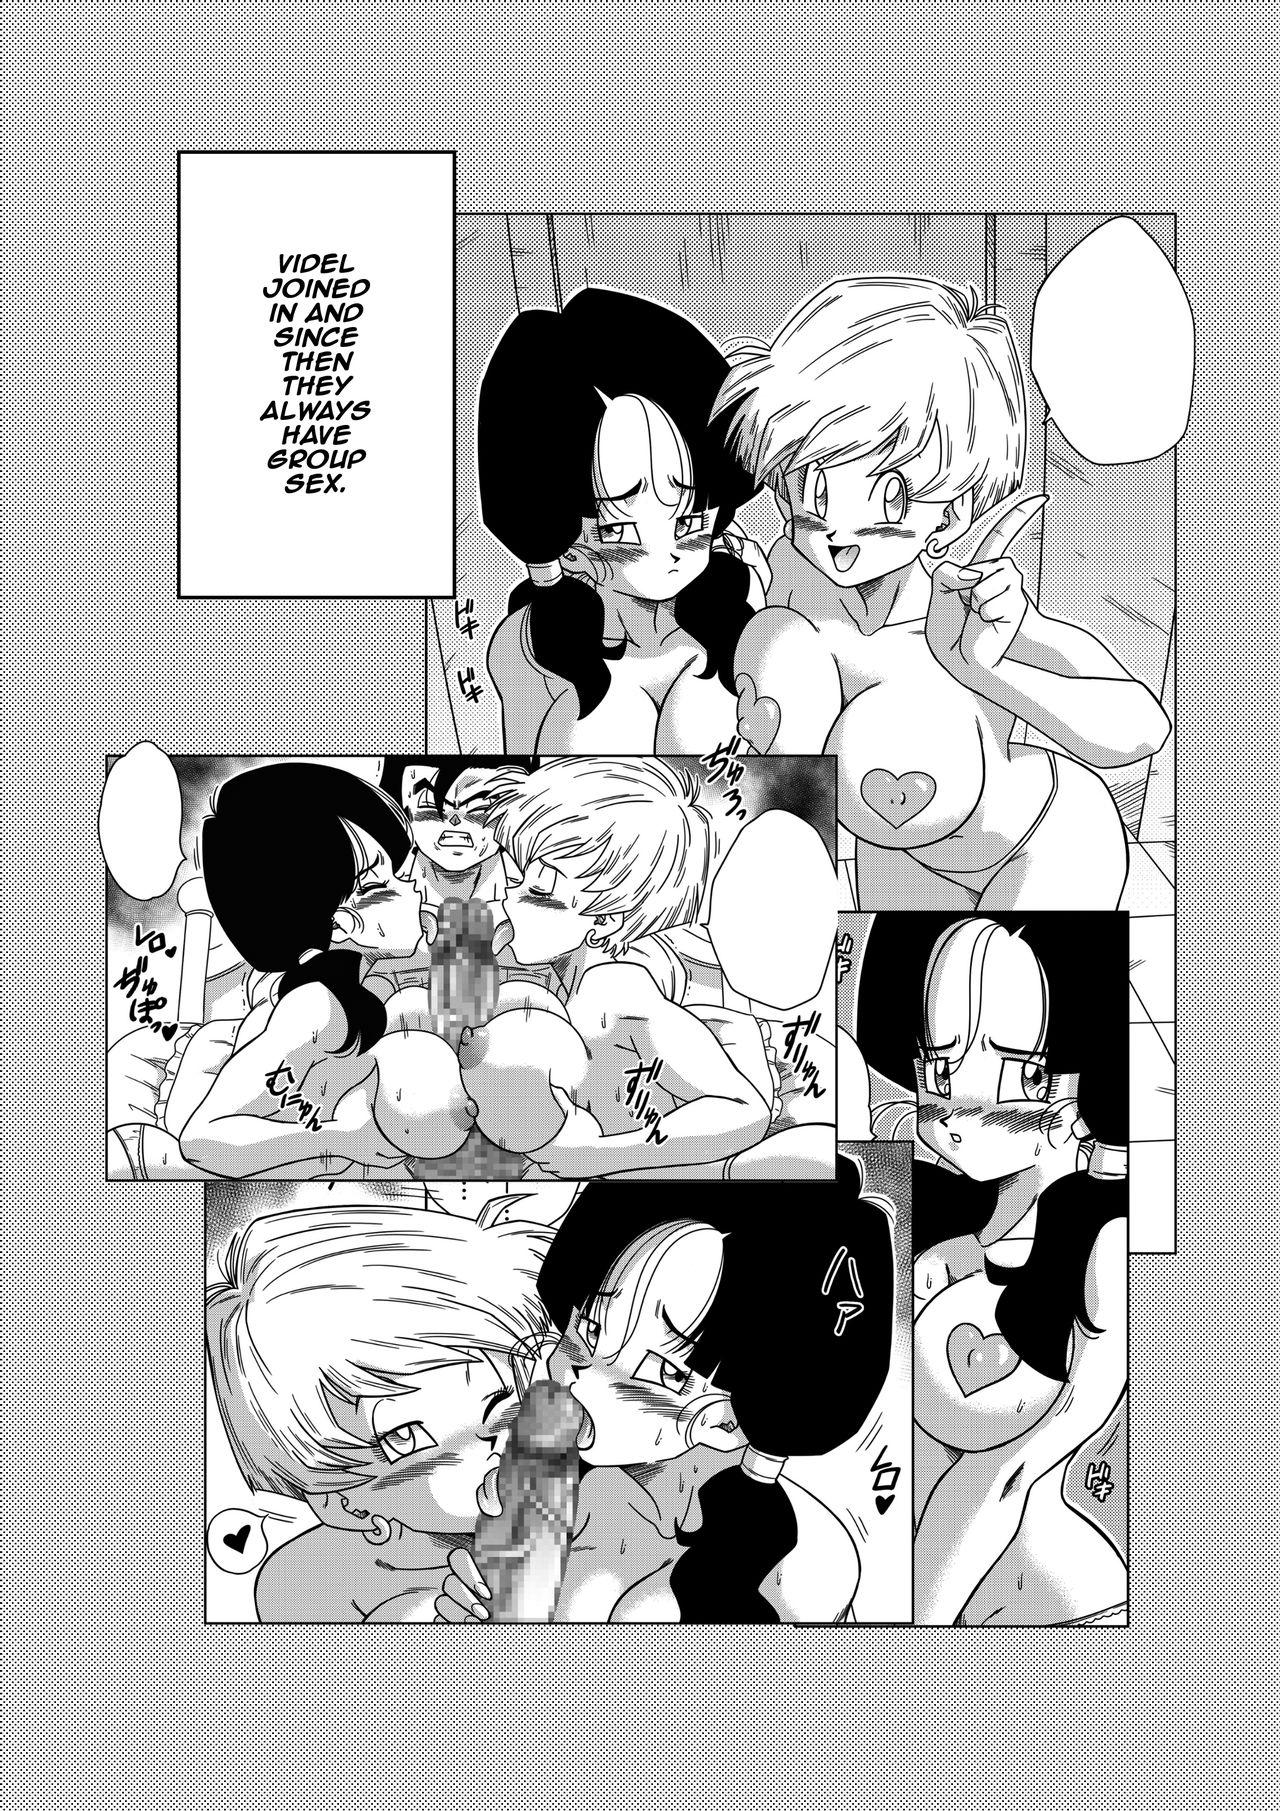 Boy LOVE TRIANGLE Z PART 4 - Dragon ball z Gapes Gaping Asshole - Page 4